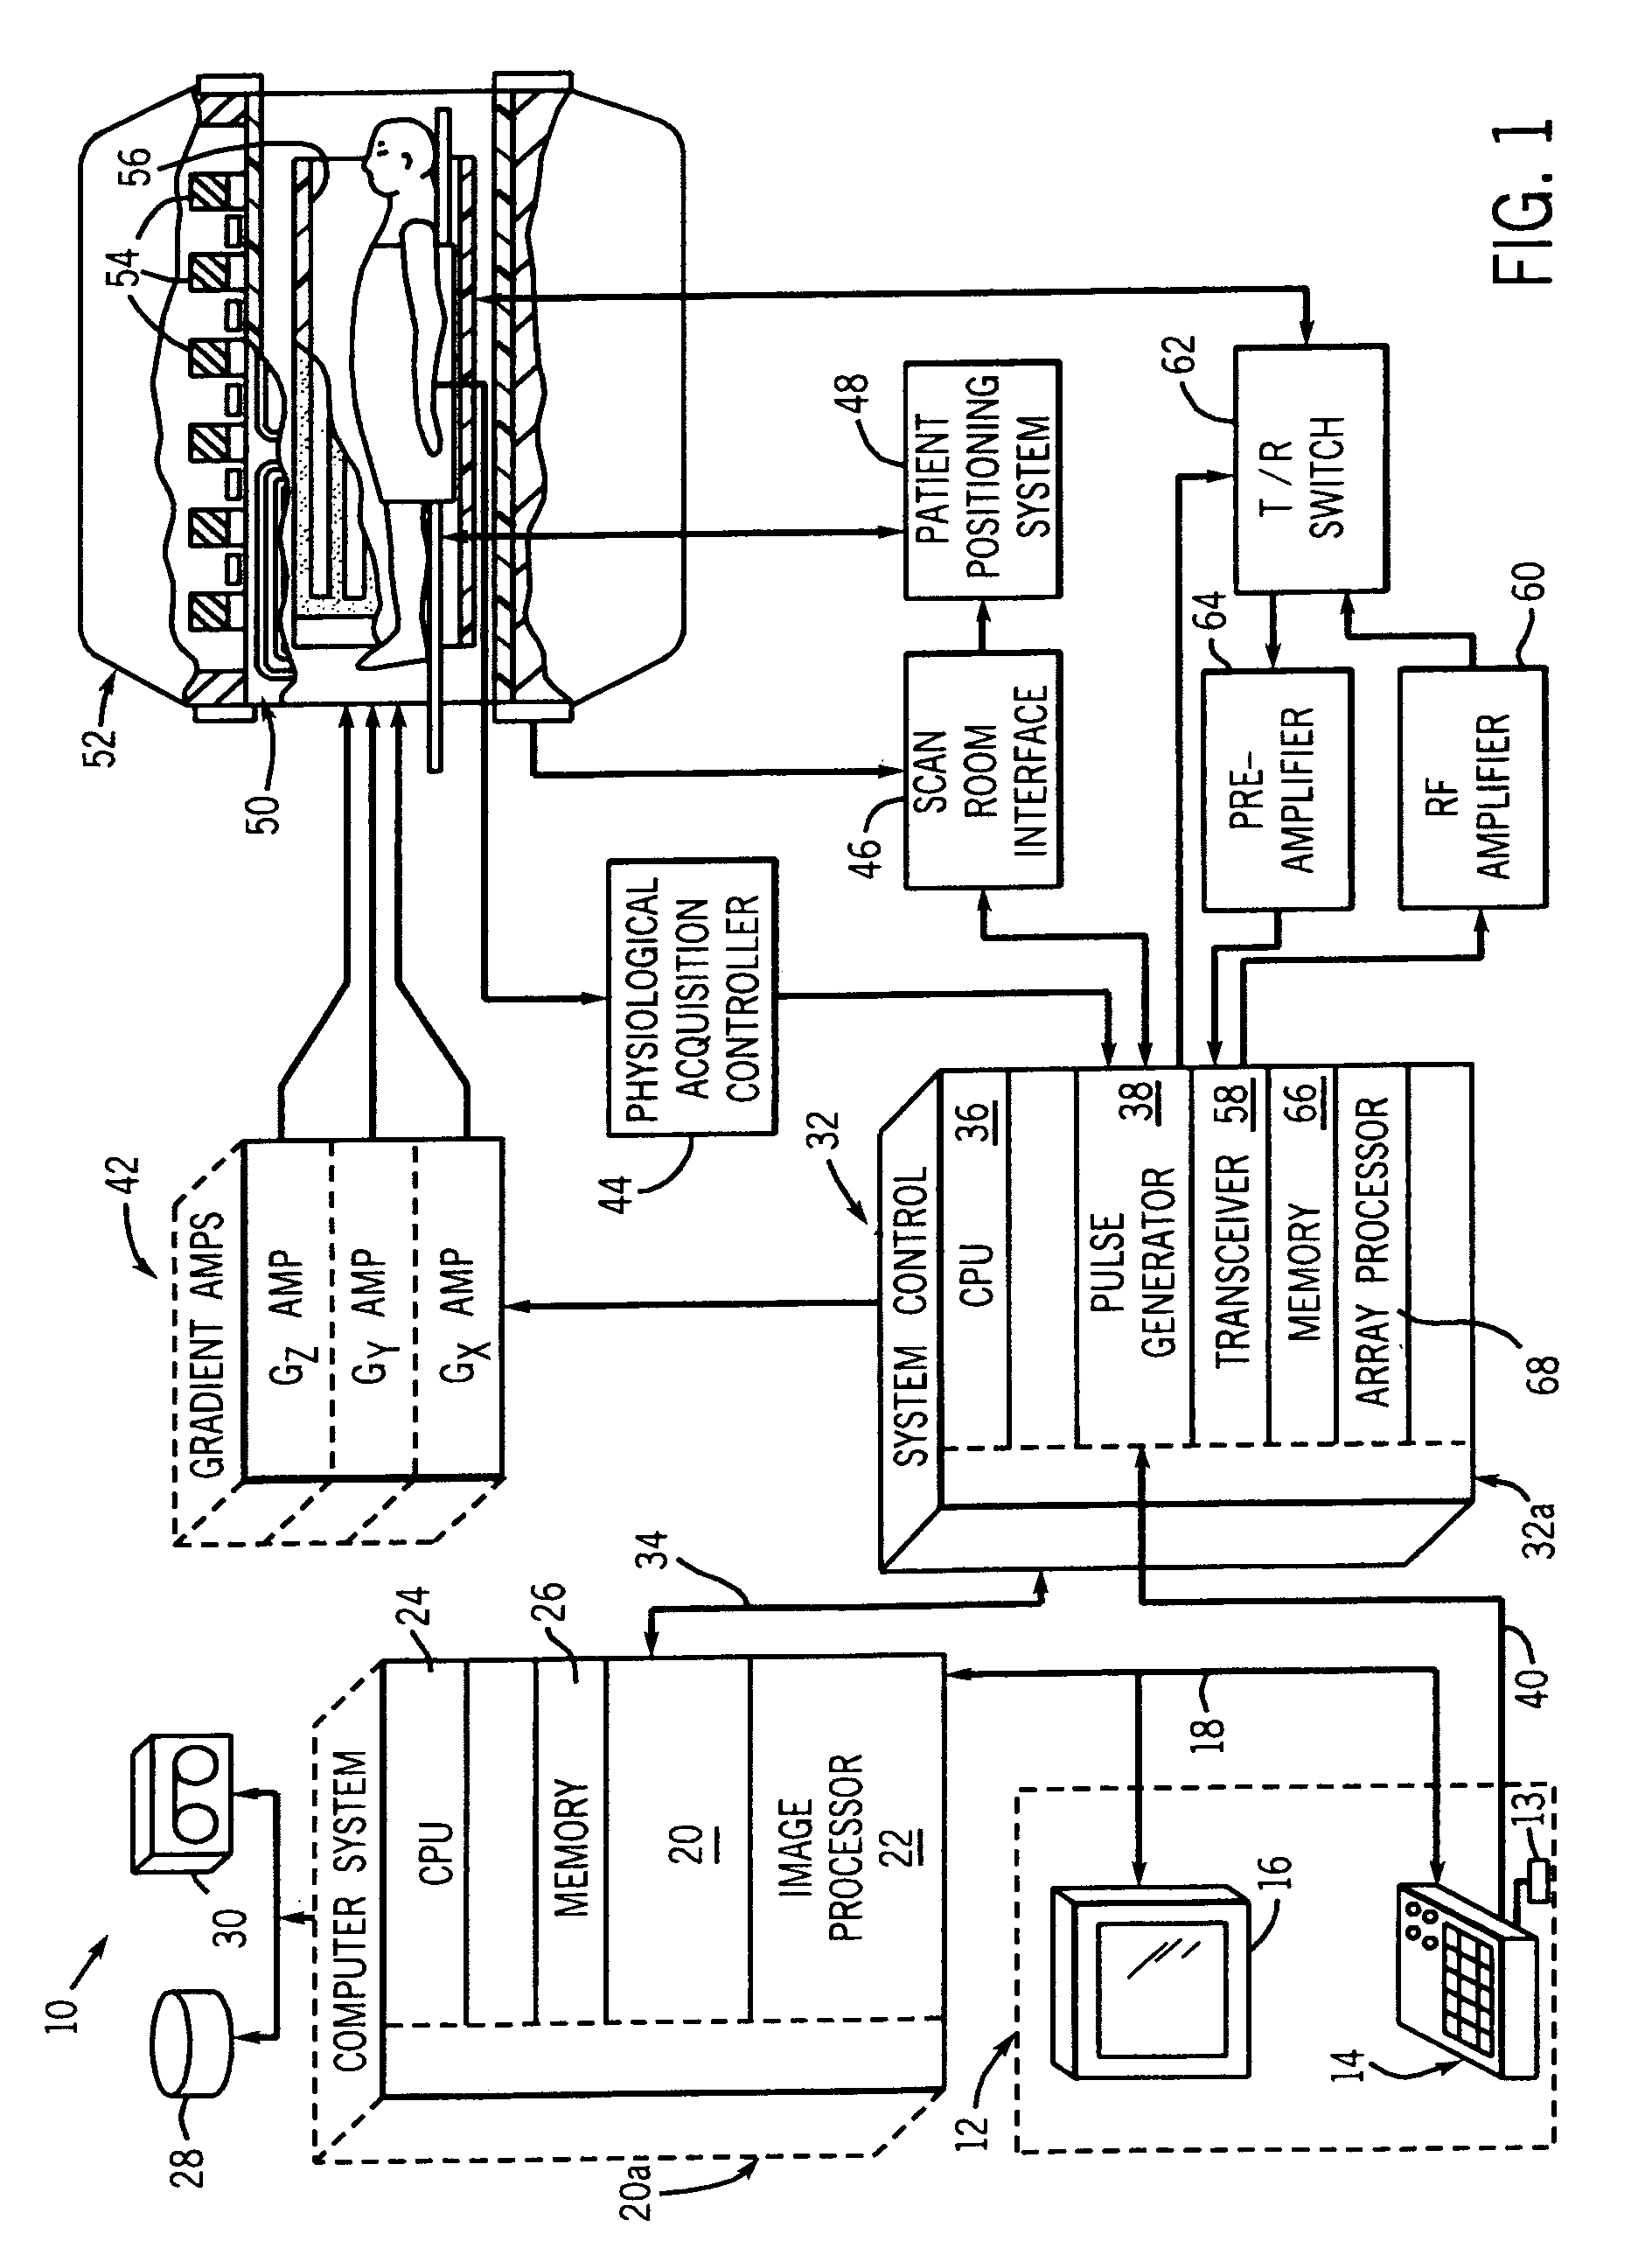 Method and system of determining in-plane motion in propeller data